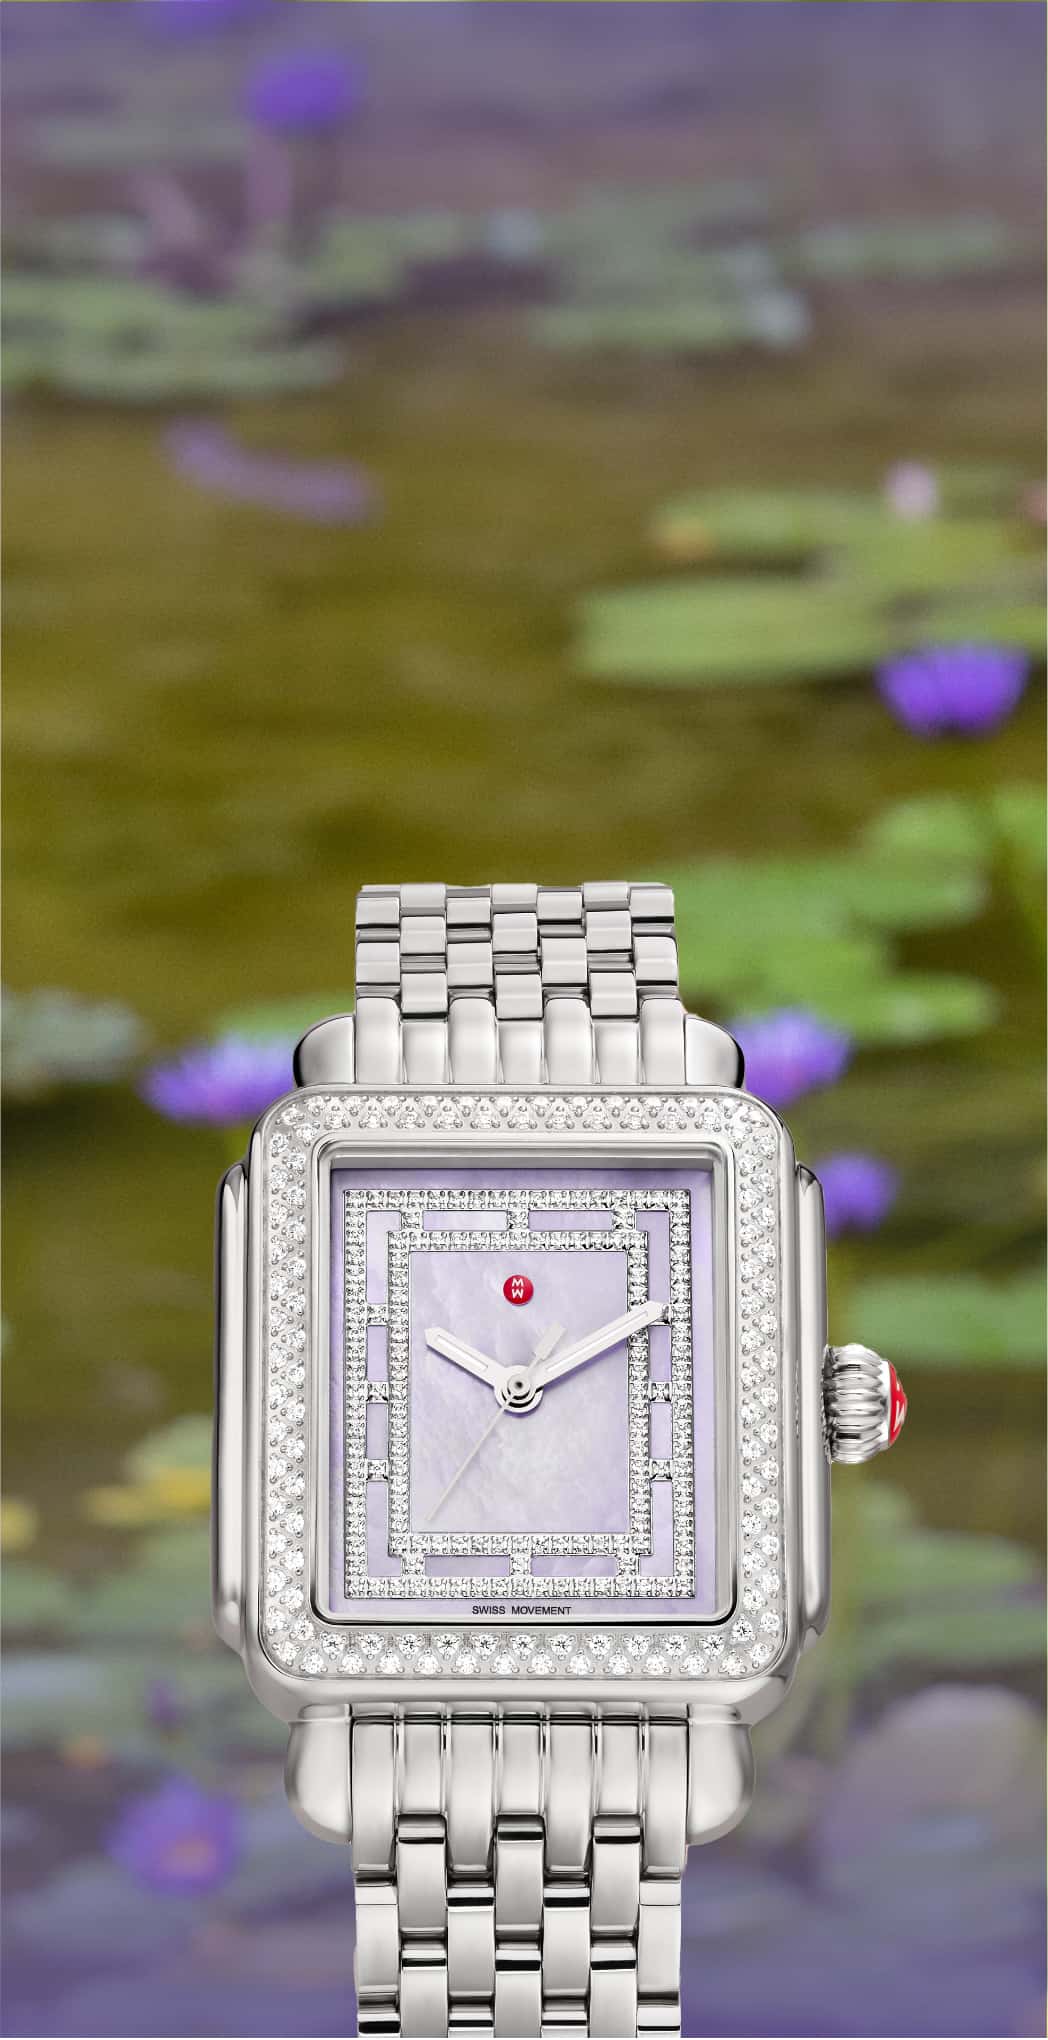 Deco watch with lavender mother-of-pearl face and pave diamond design